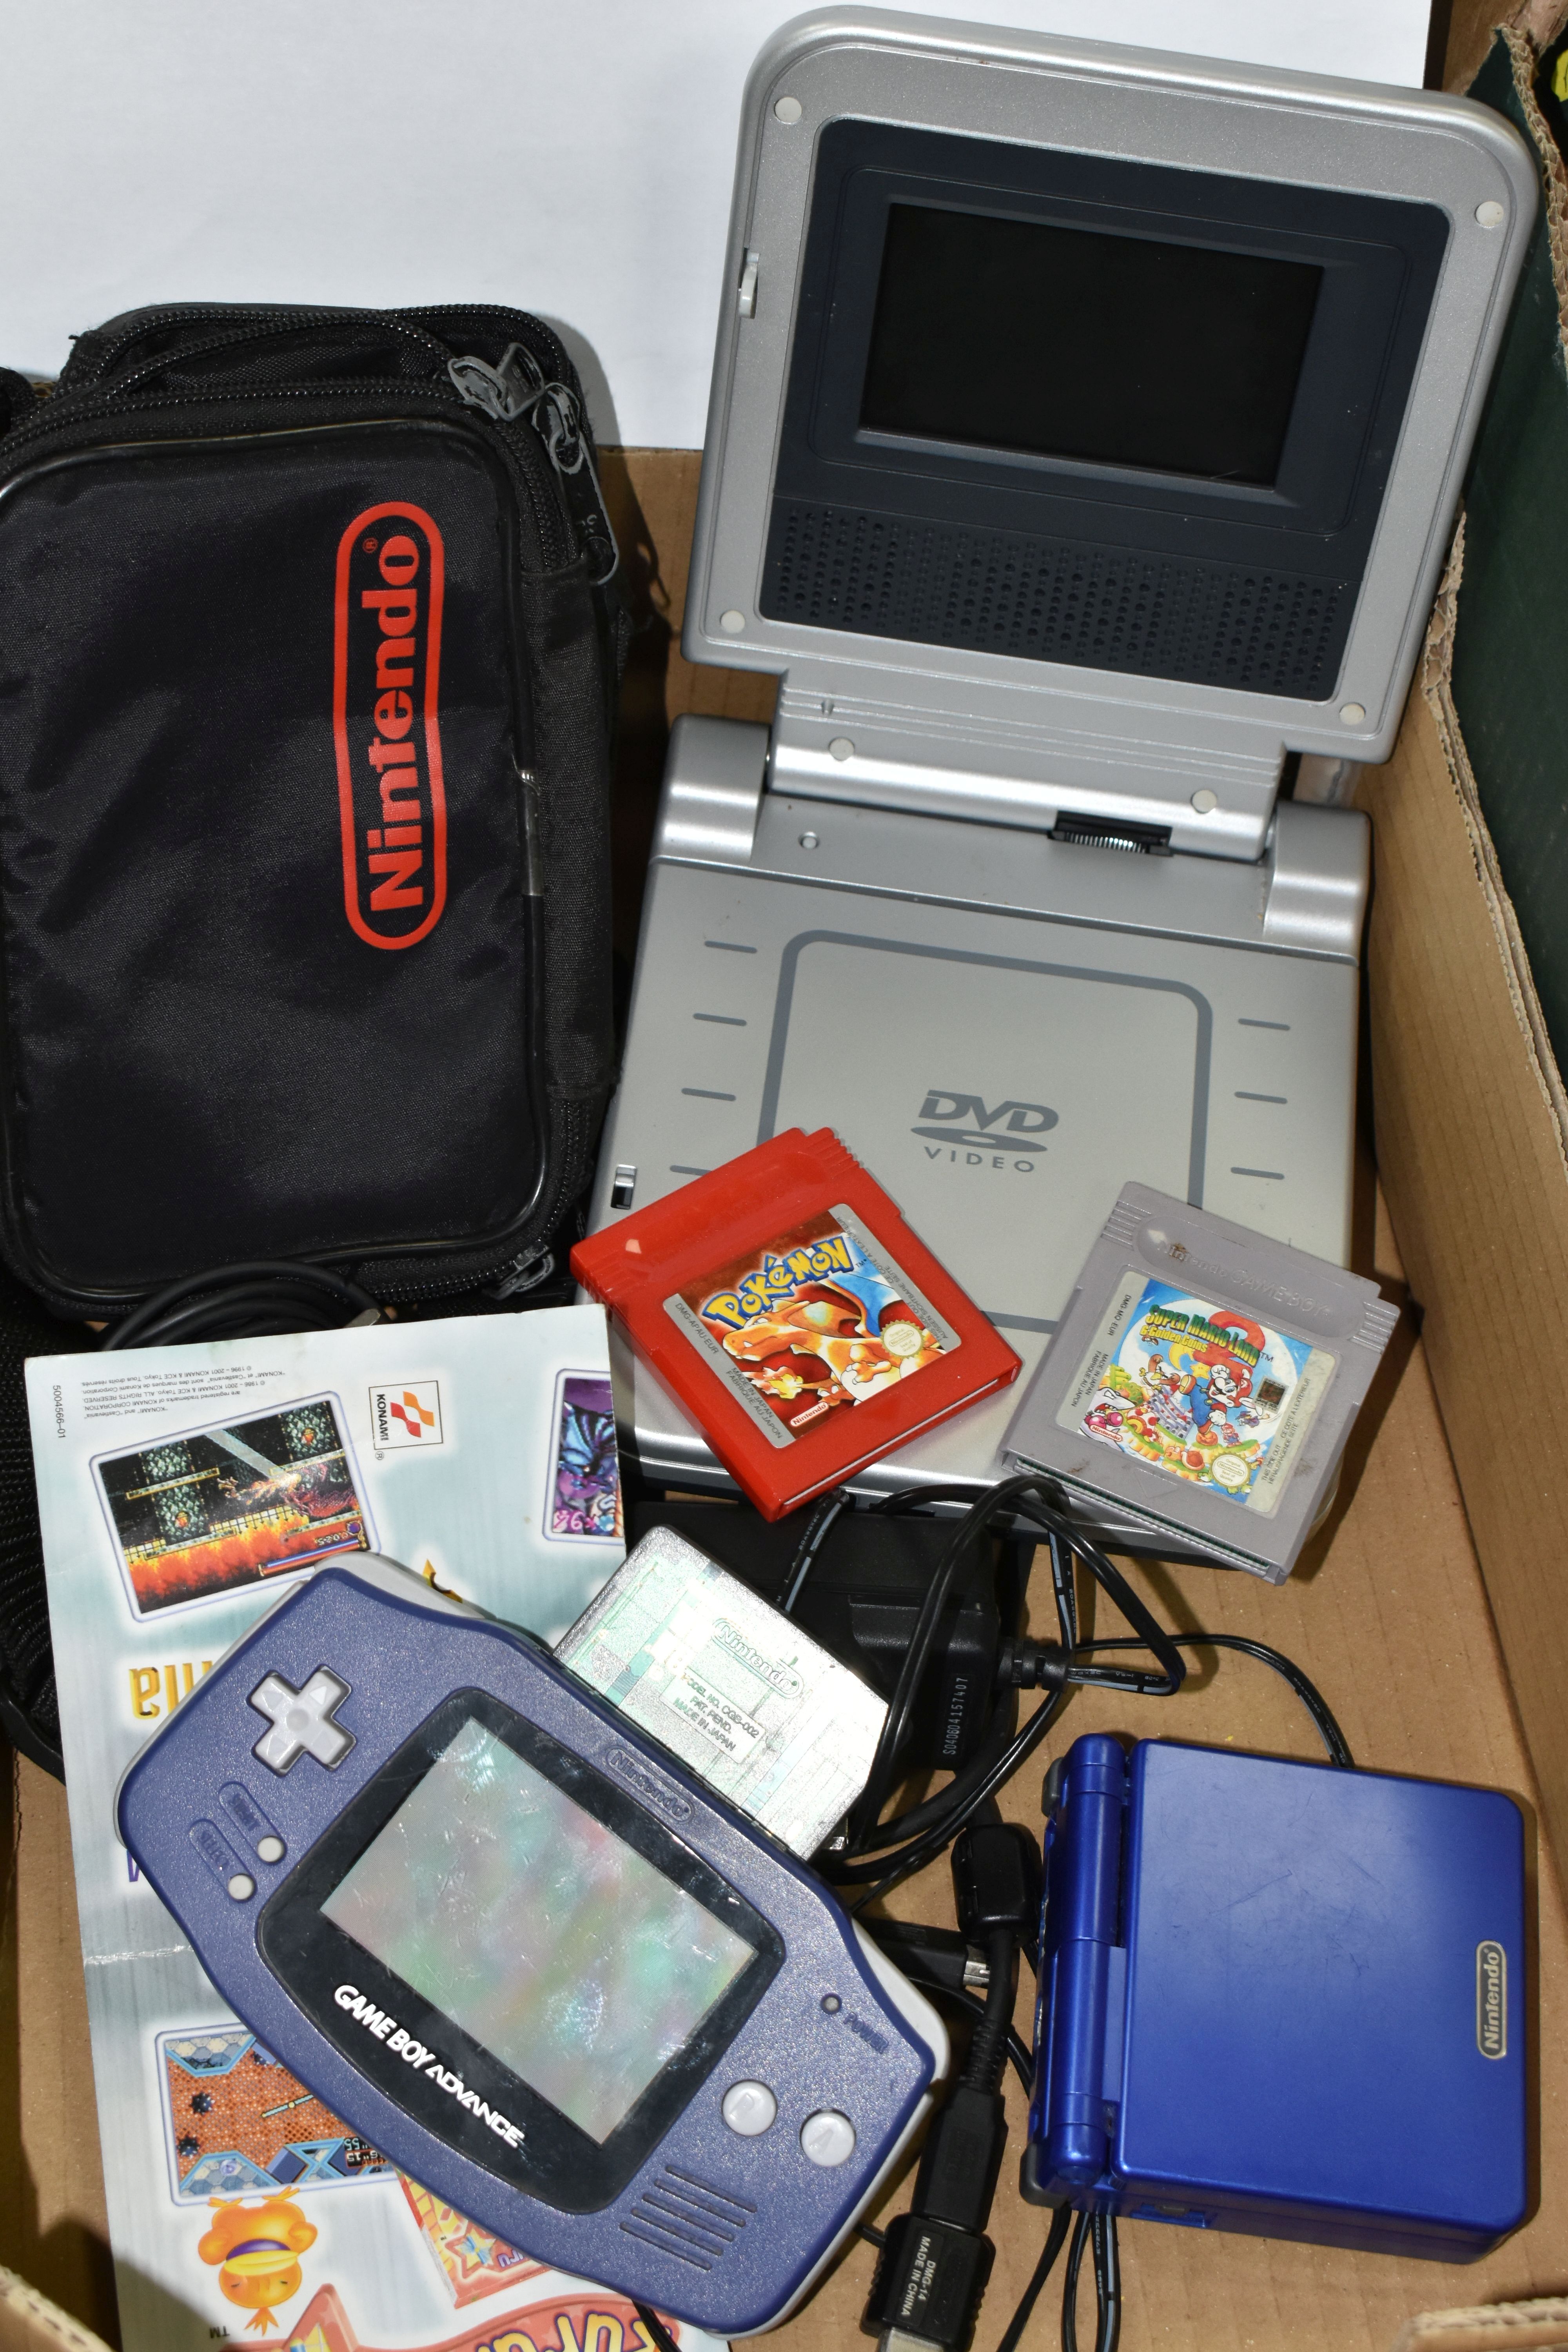 NINTENDO GAMEBOY ADVANCE, NINTENDO GAMEBOY ADVANCE SP AND GAMES, includes Super Mario Advance, - Image 3 of 4